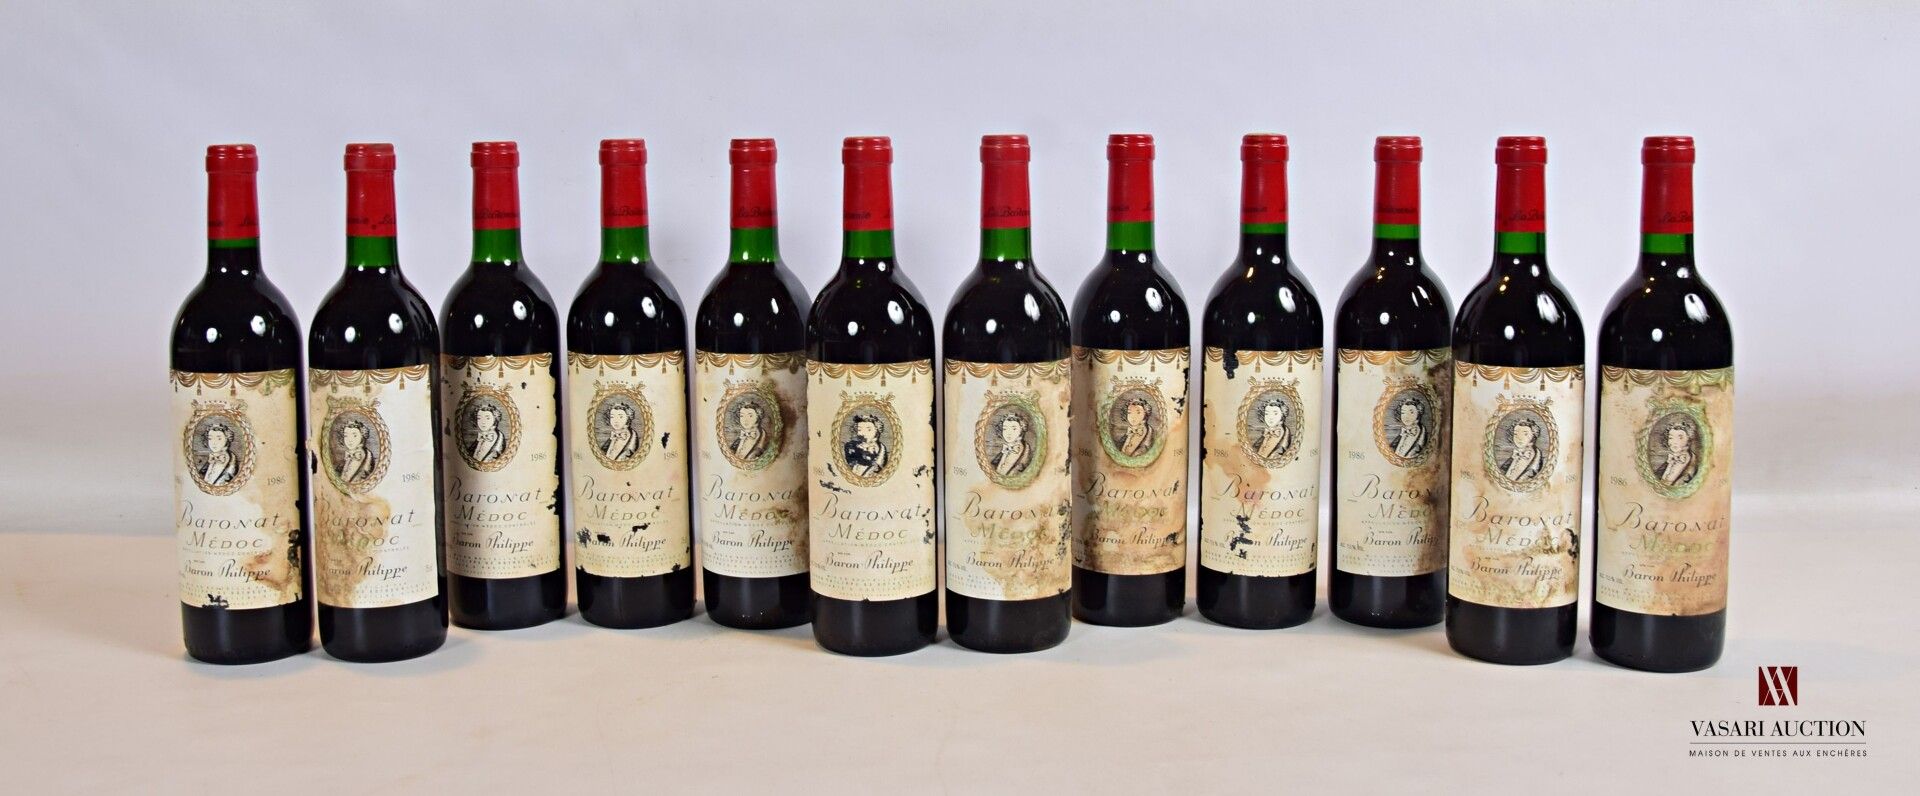 Null 12 bottles BARONAT Medoc 1986

	And. More or less stained, and more or less&hellip;